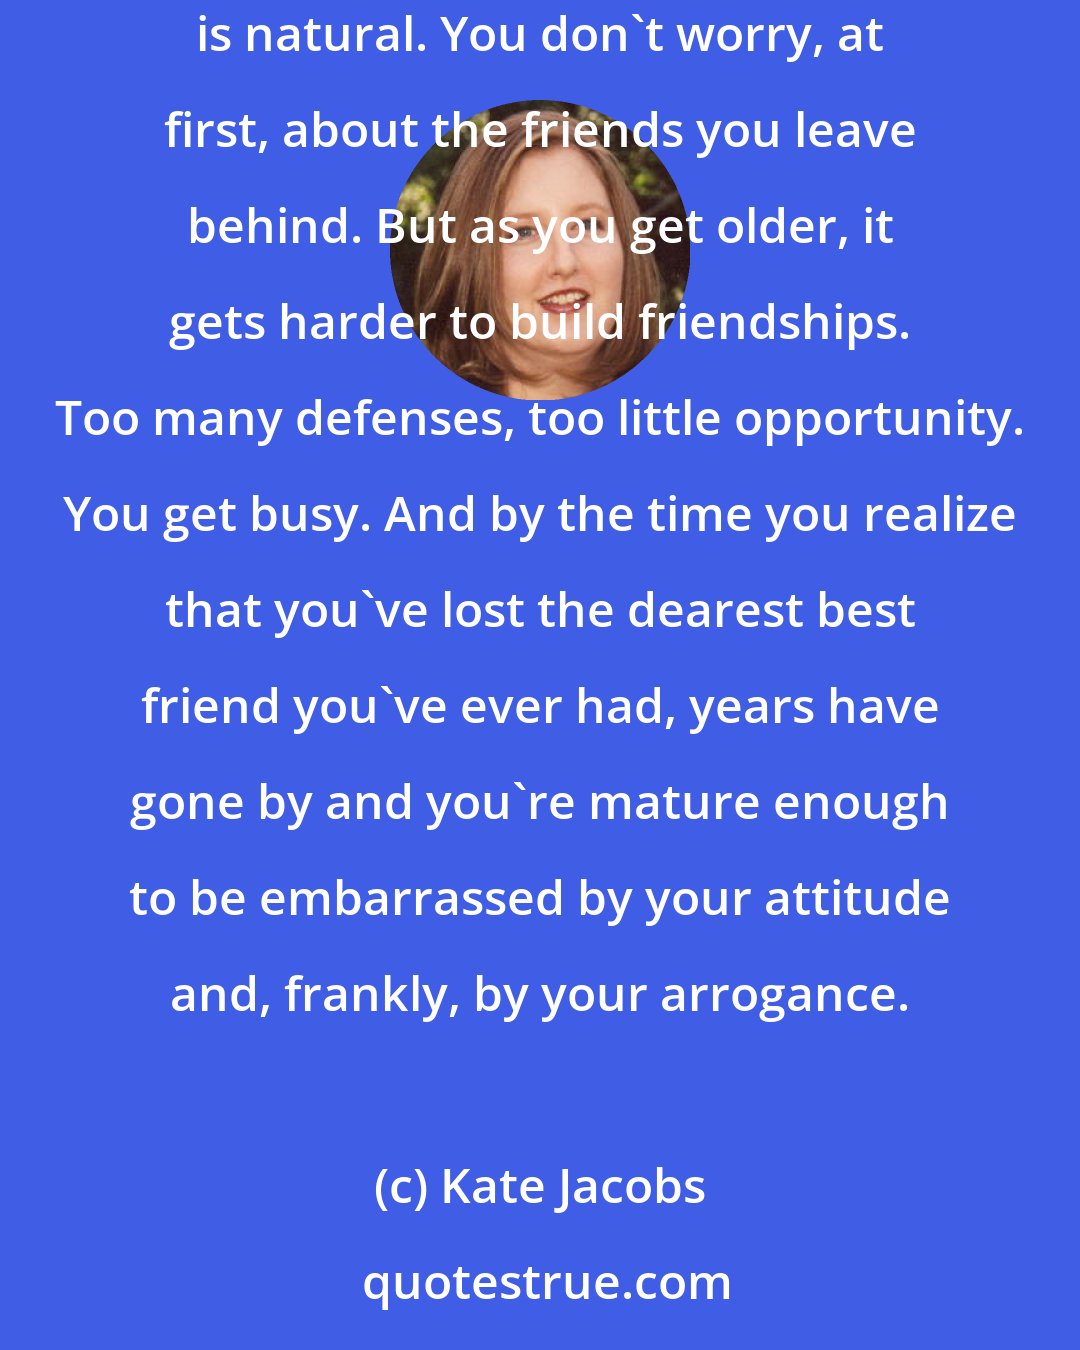 Kate Jacobs: The thing is, that when you're young, you always think you'll meet all sorts of wonderful people, that drifting apart and losing friends is natural. You don't worry, at first, about the friends you leave behind. But as you get older, it gets harder to build friendships. Too many defenses, too little opportunity. You get busy. And by the time you realize that you've lost the dearest best friend you've ever had, years have gone by and you're mature enough to be embarrassed by your attitude and, frankly, by your arrogance.